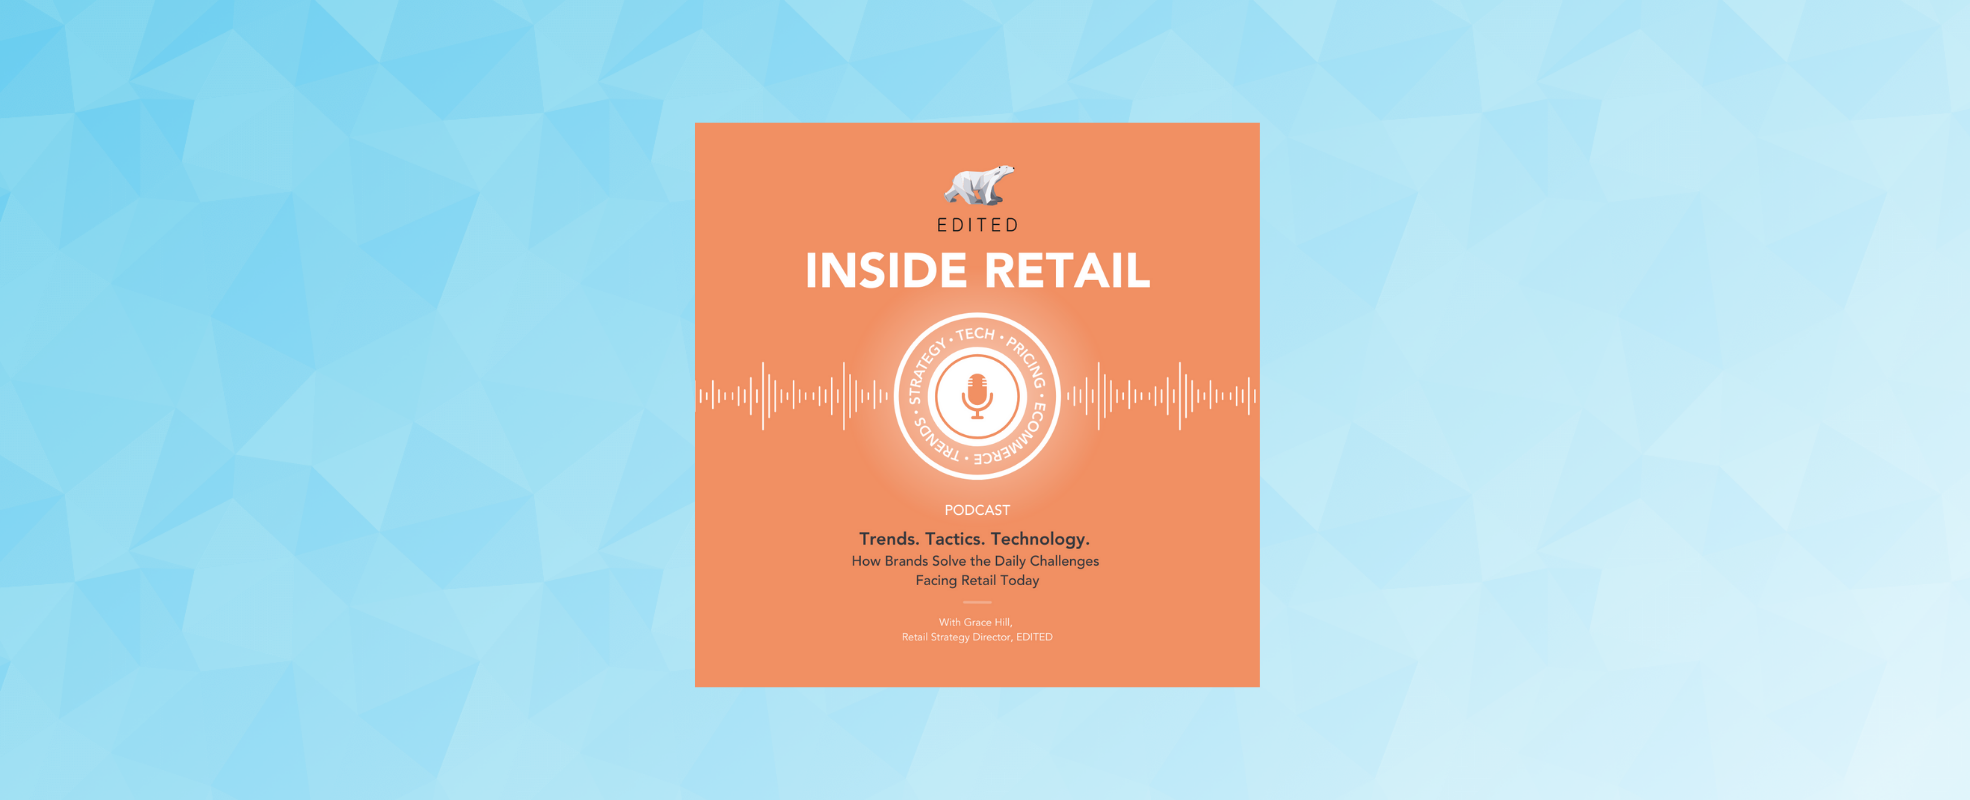 Inside Retail: EDITIONS - The Future of Men’s Beauty | EDITED